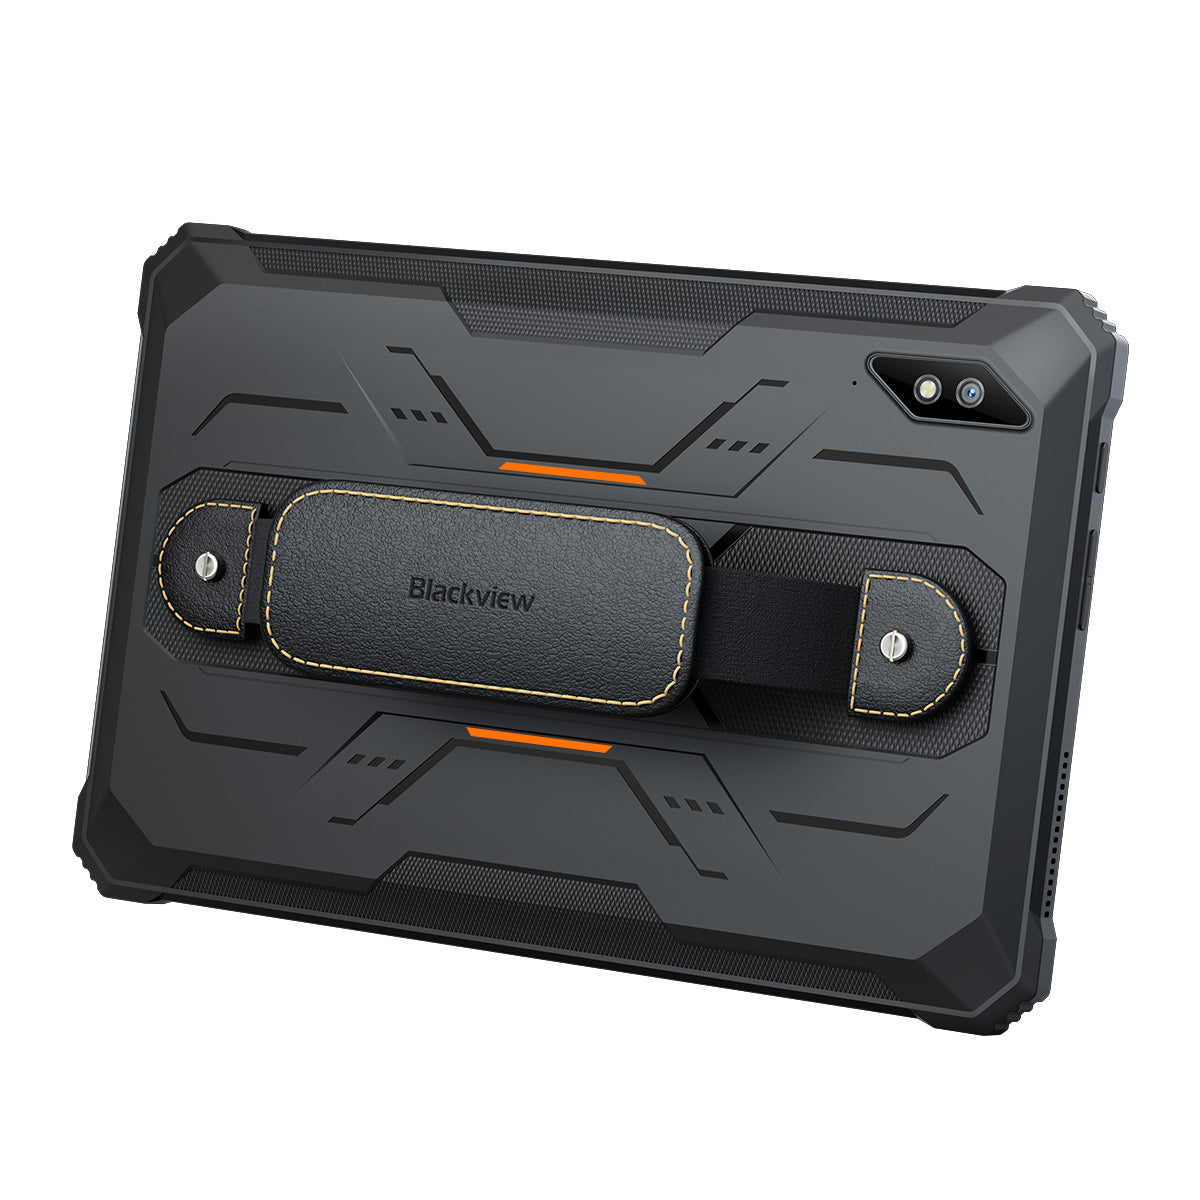 Active 8 Pro 22000mAh 頑丈なタブレット - Blackview Global Store